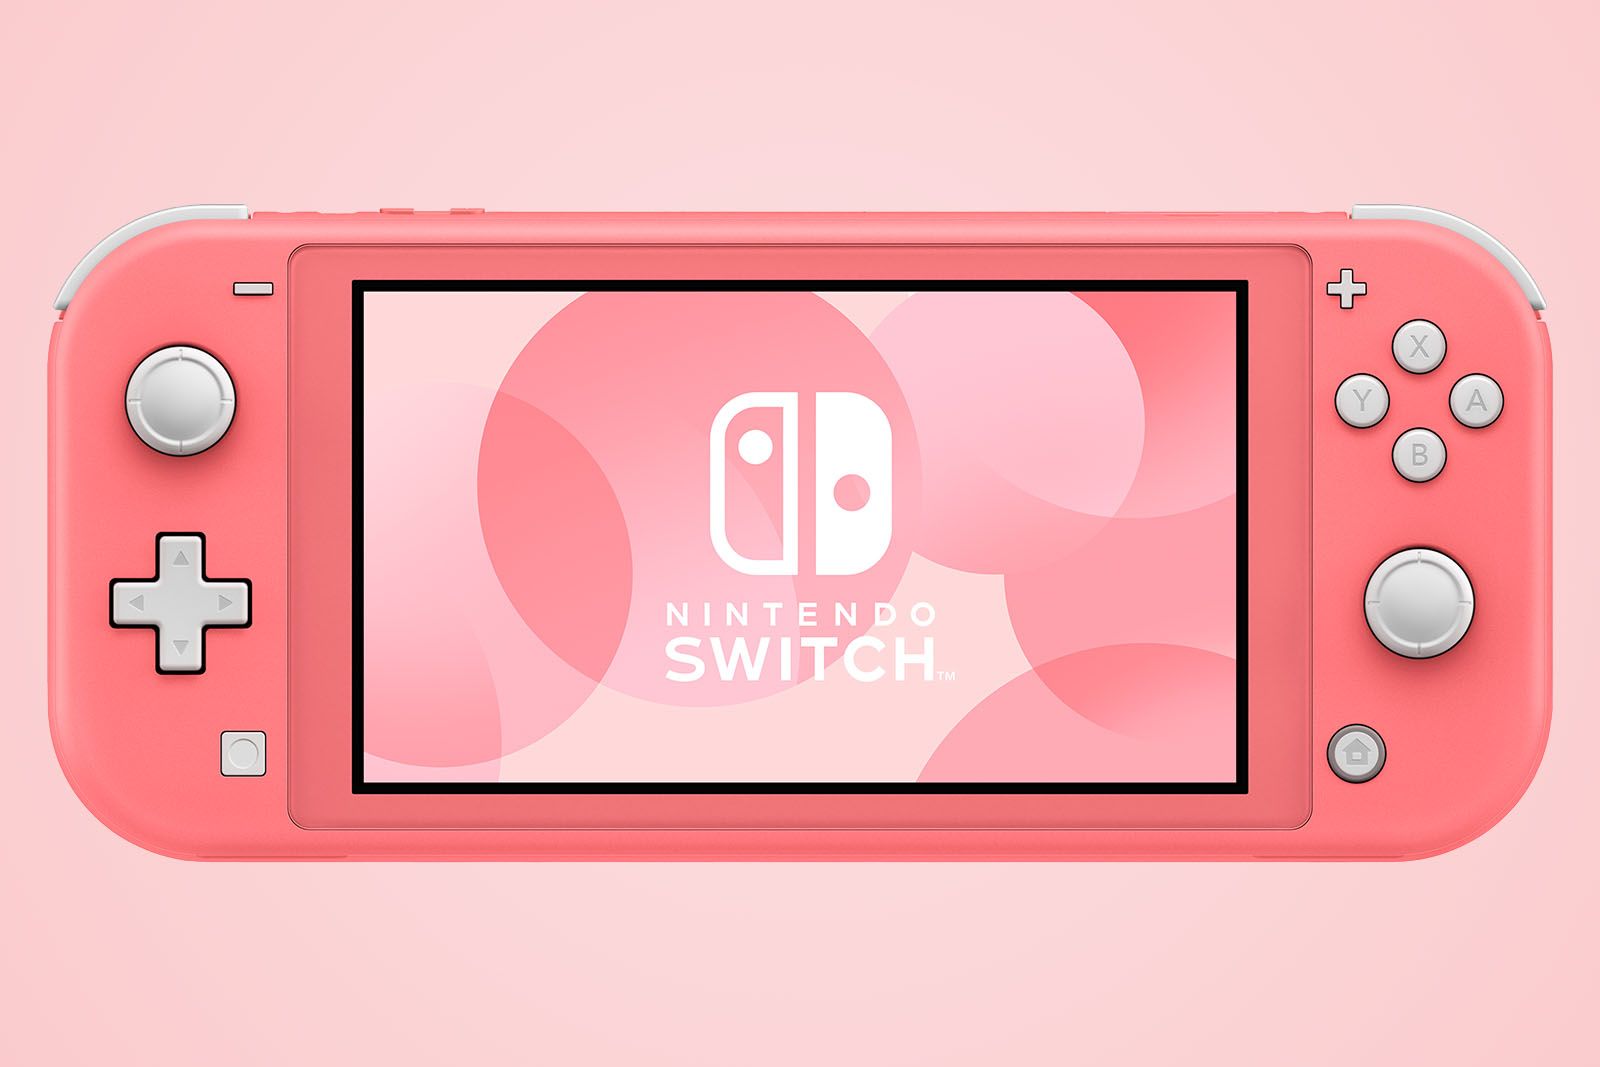 Nintendo Switch Lite In Stunning Coral Pink Coming To Uk And Europe image 1